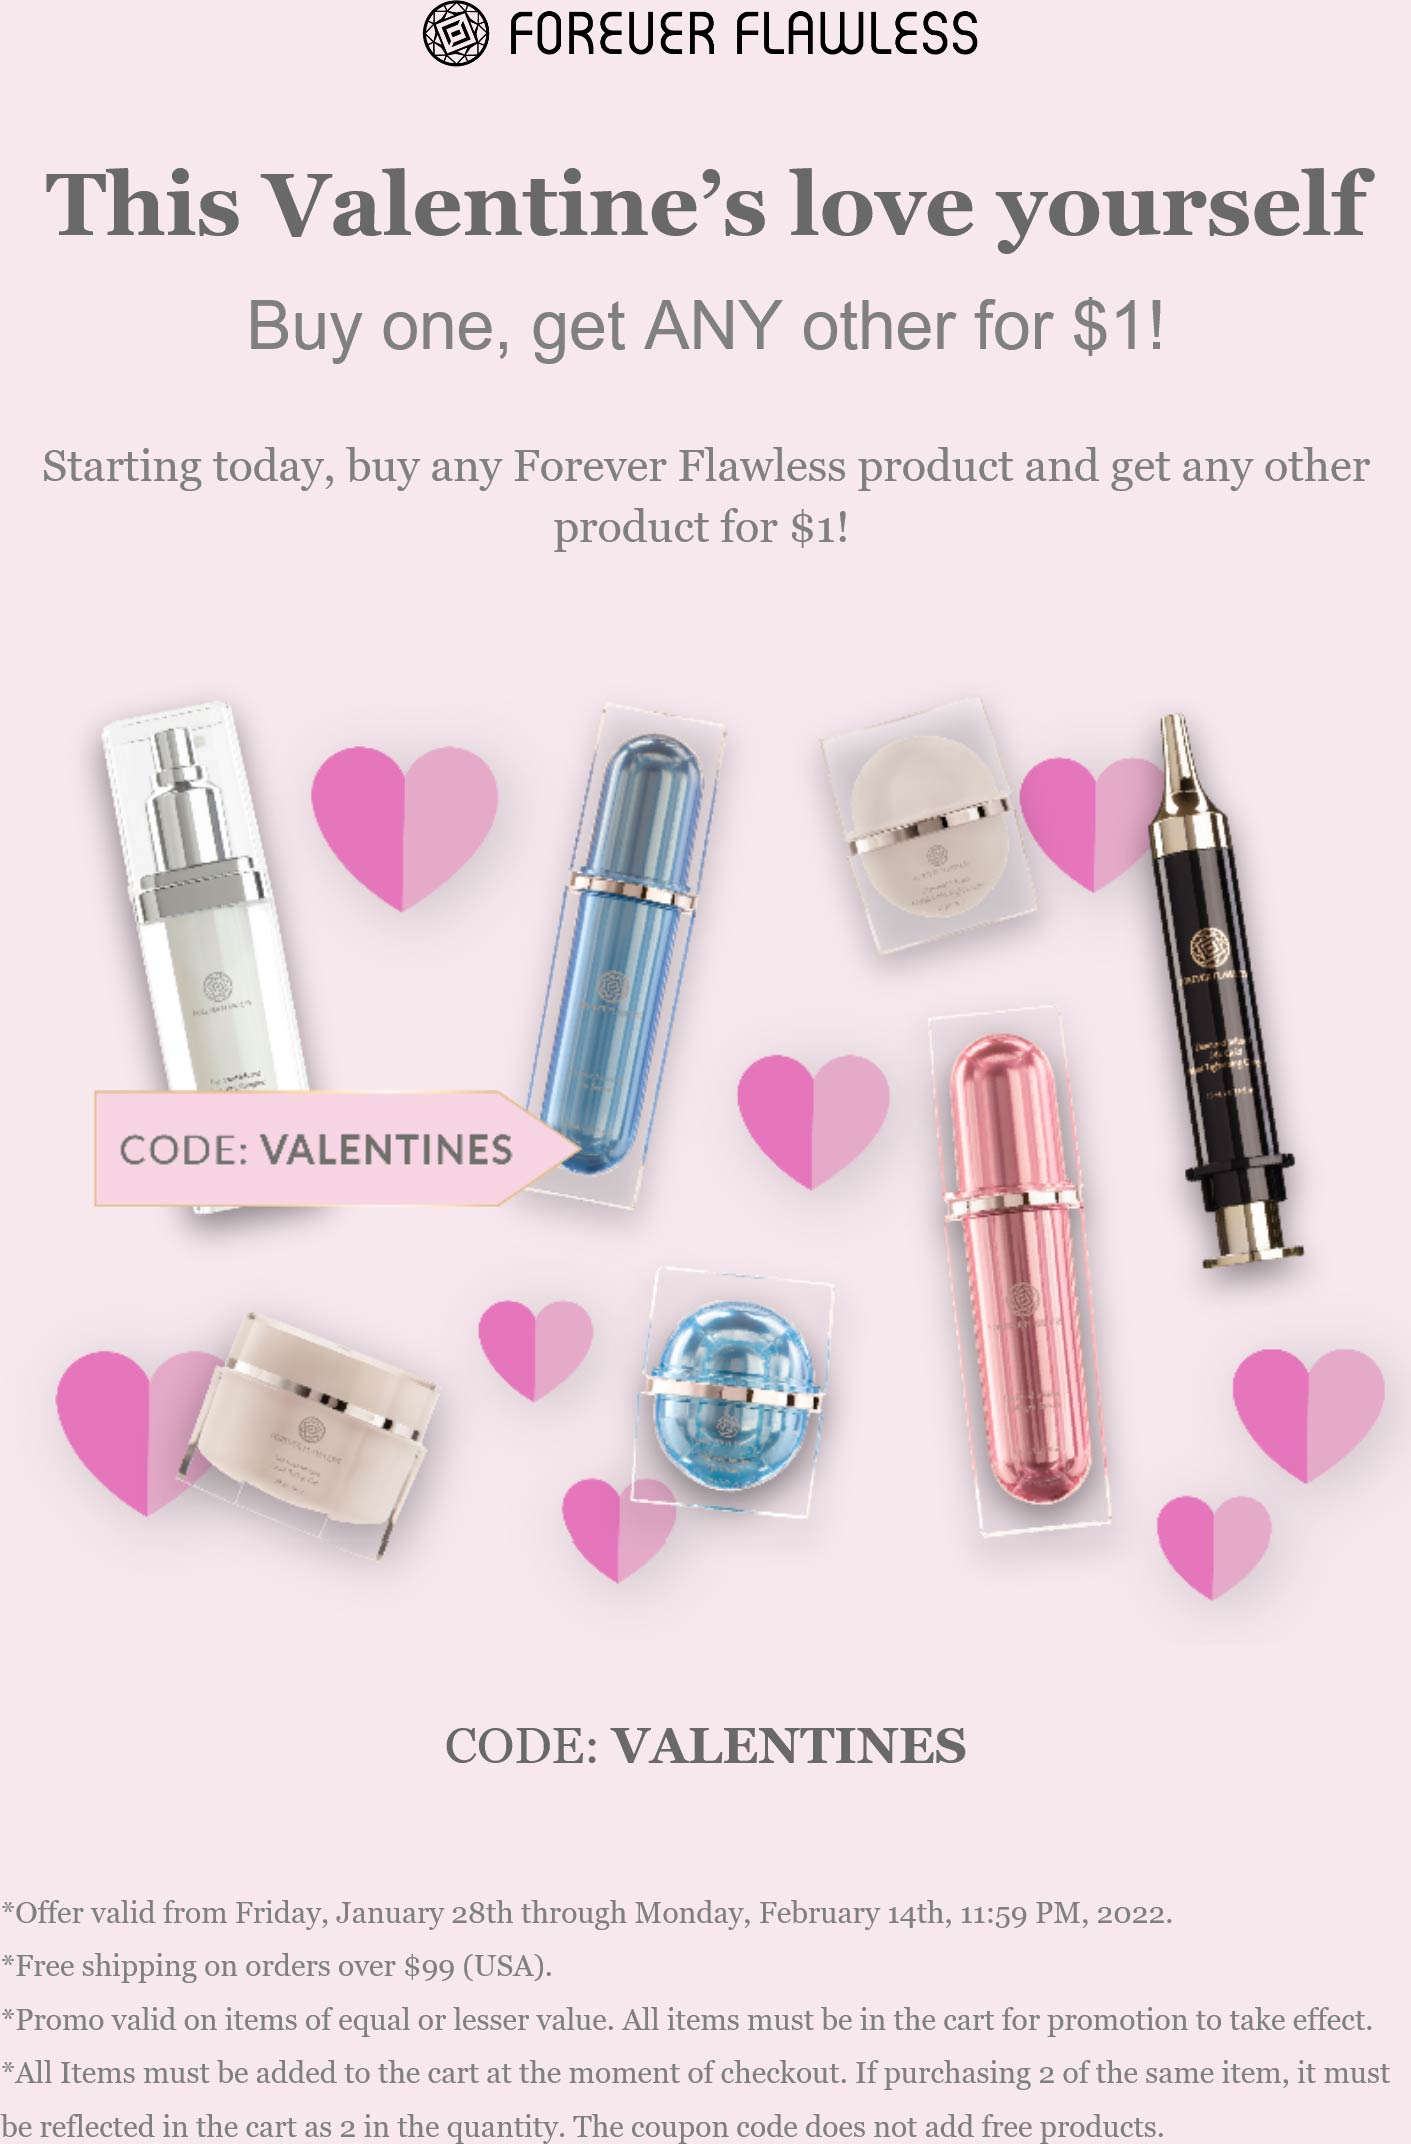 Forever Flawless stores Coupon  Second item for $1 at Forever Flawless via promo code VALENTINES #foreverflawless 